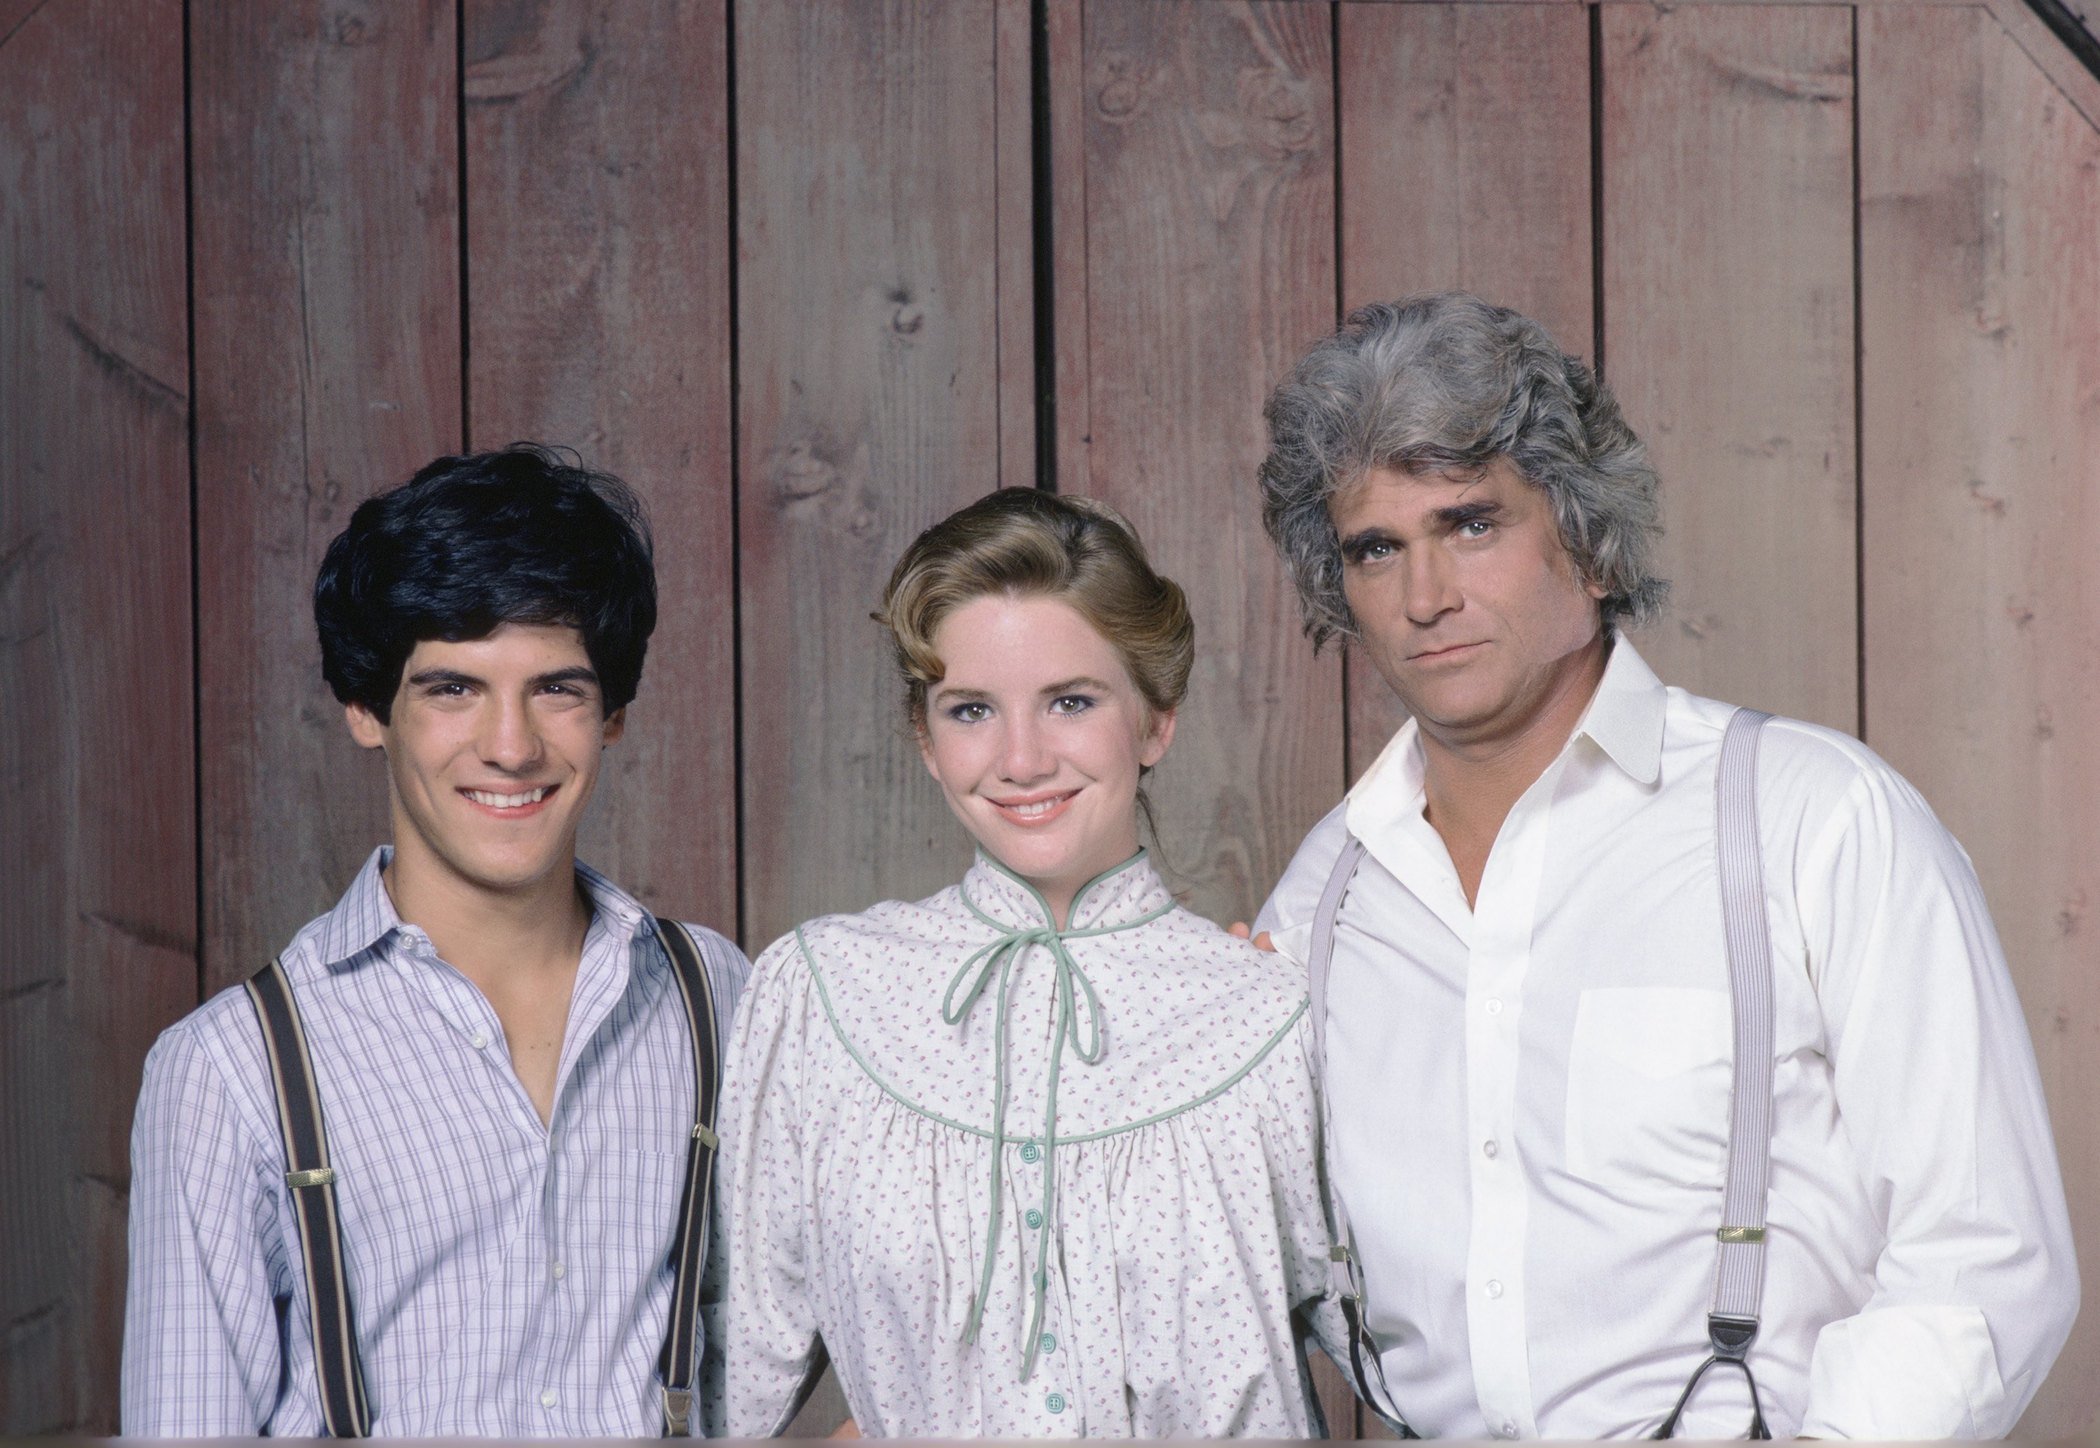 (L to R): Matthew Labyorteaux as Albert Ingalls, Melissa Gilbert as Laura Ingalls Wilder, and Michael Landon as Charles Philip Ingalls on 'Little House on the Prairie'